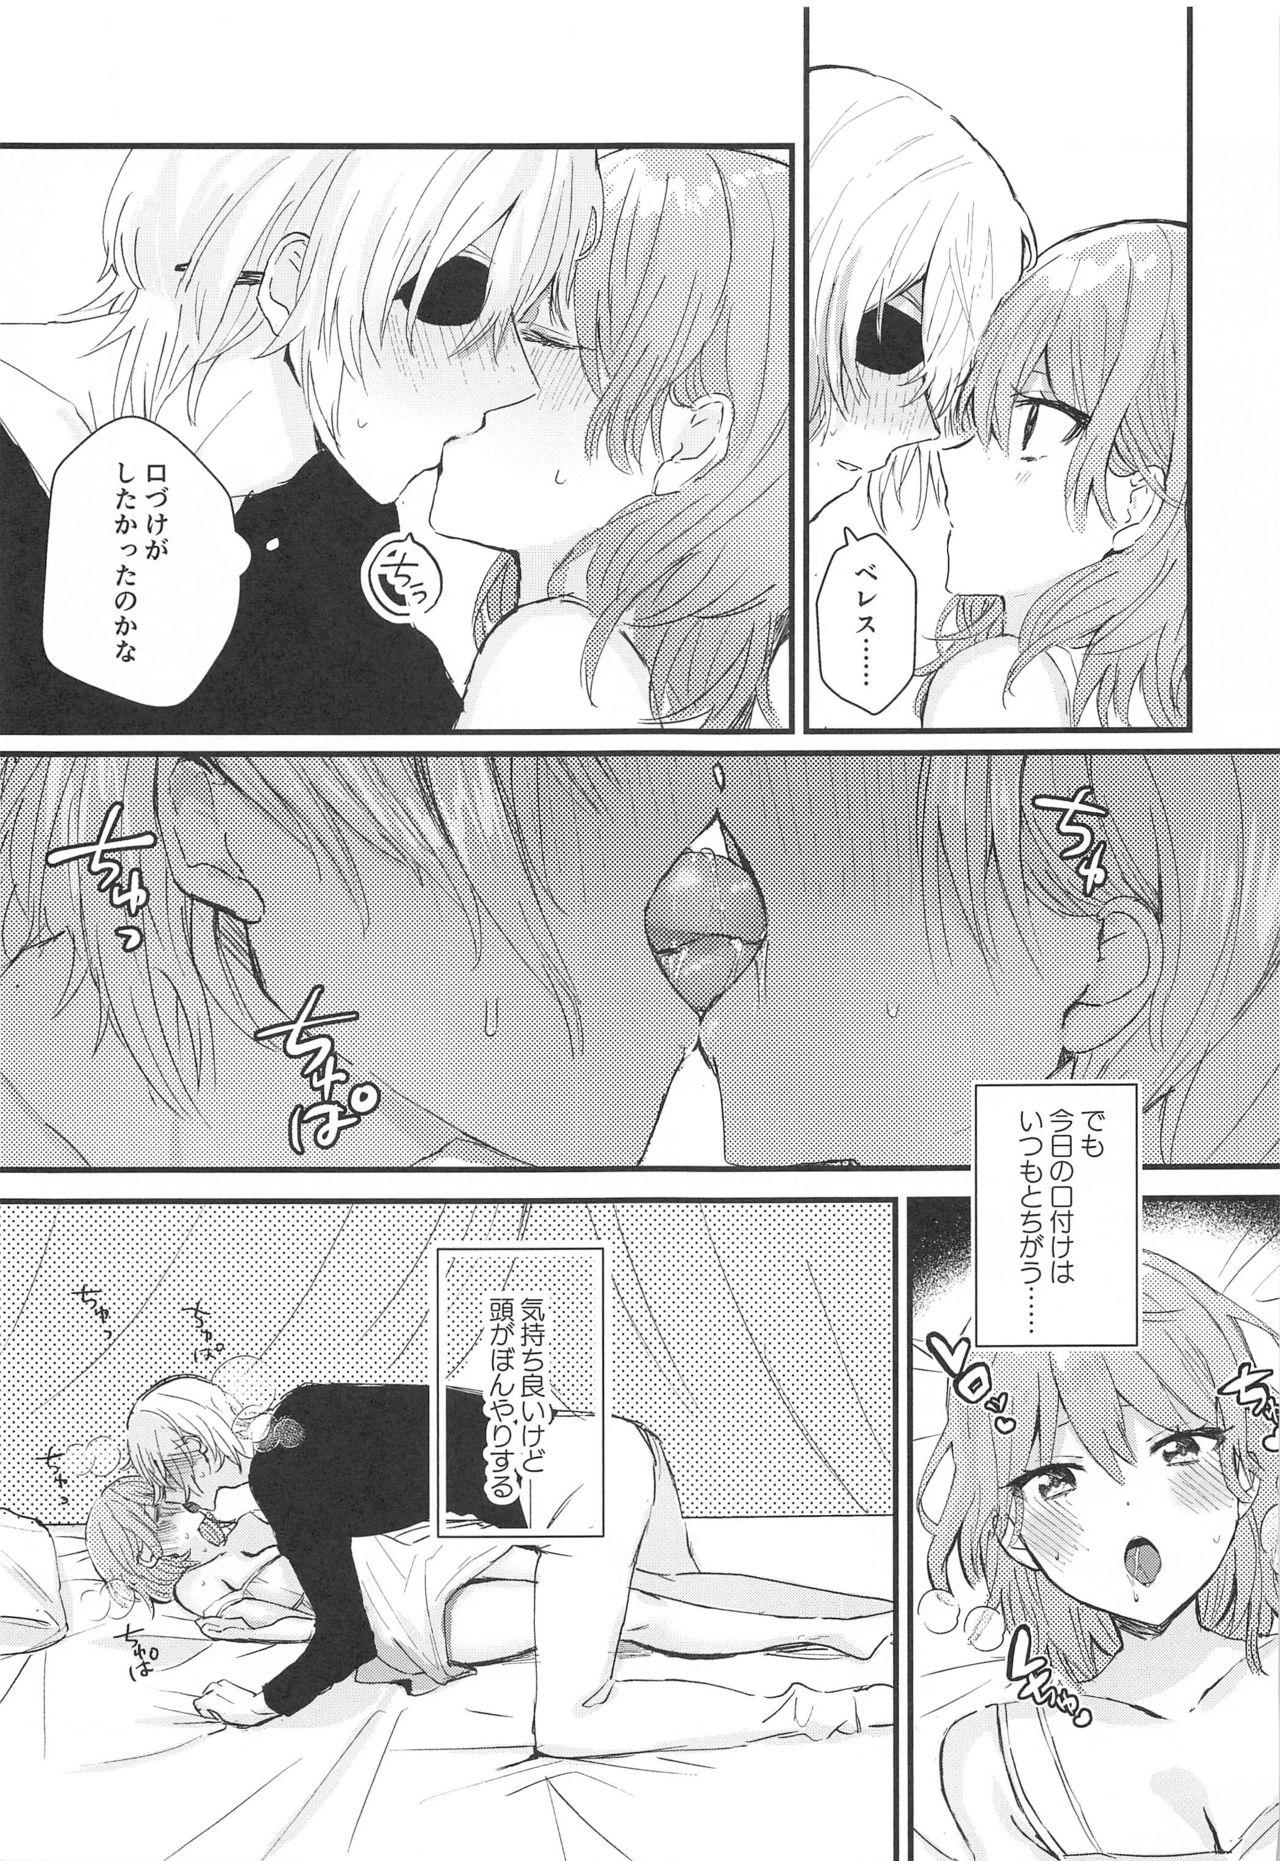 Panocha Sensei no Hatena - What the professor doesn't know - Fire emblem three houses Livecam - Page 6